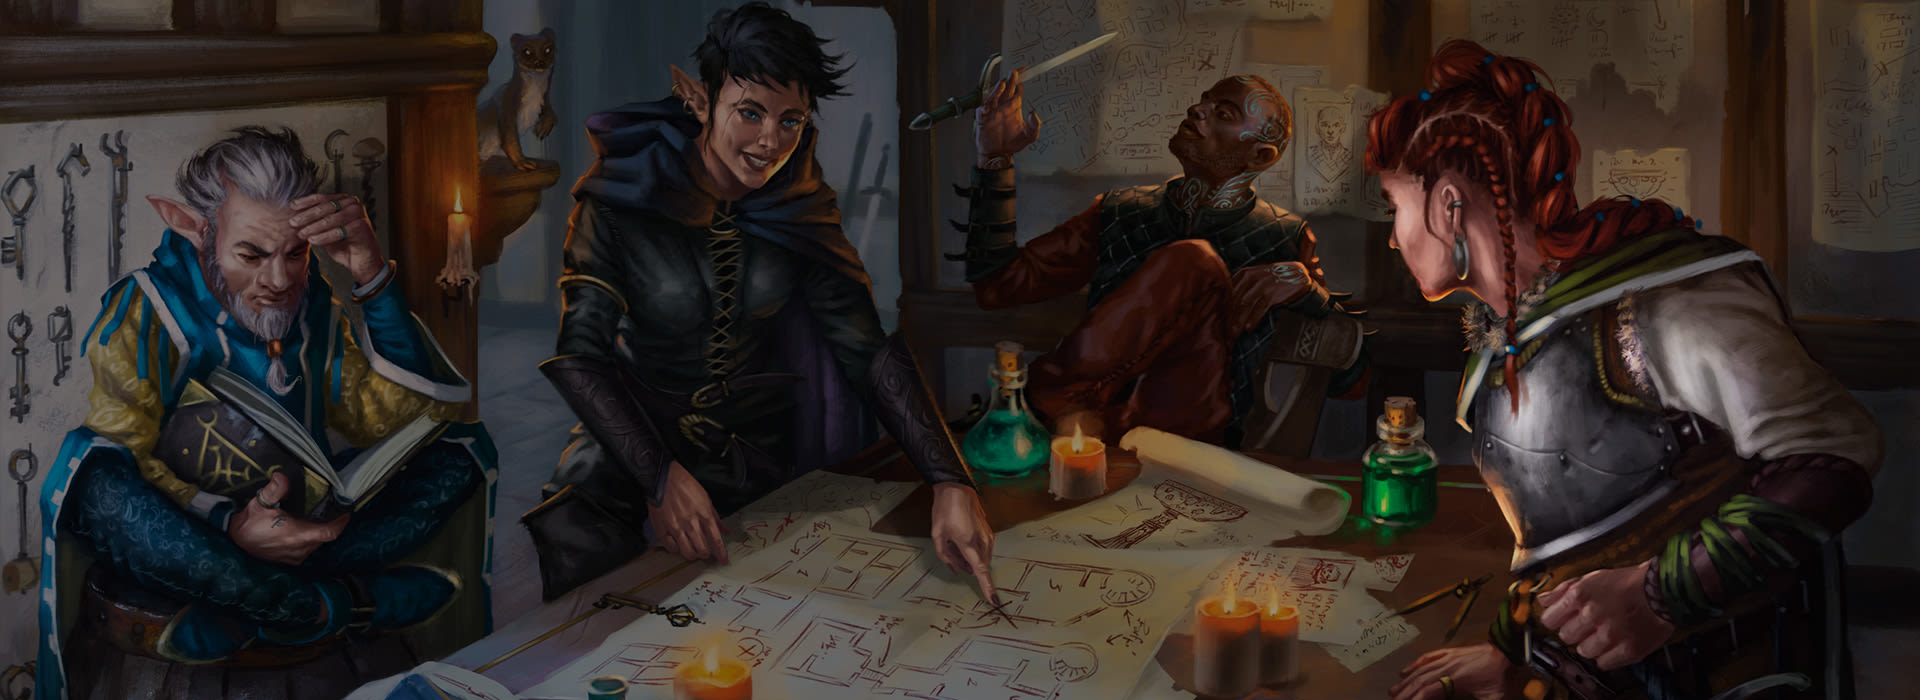 A Beginner's Guide to Dungeons & Dragons - The New York Times